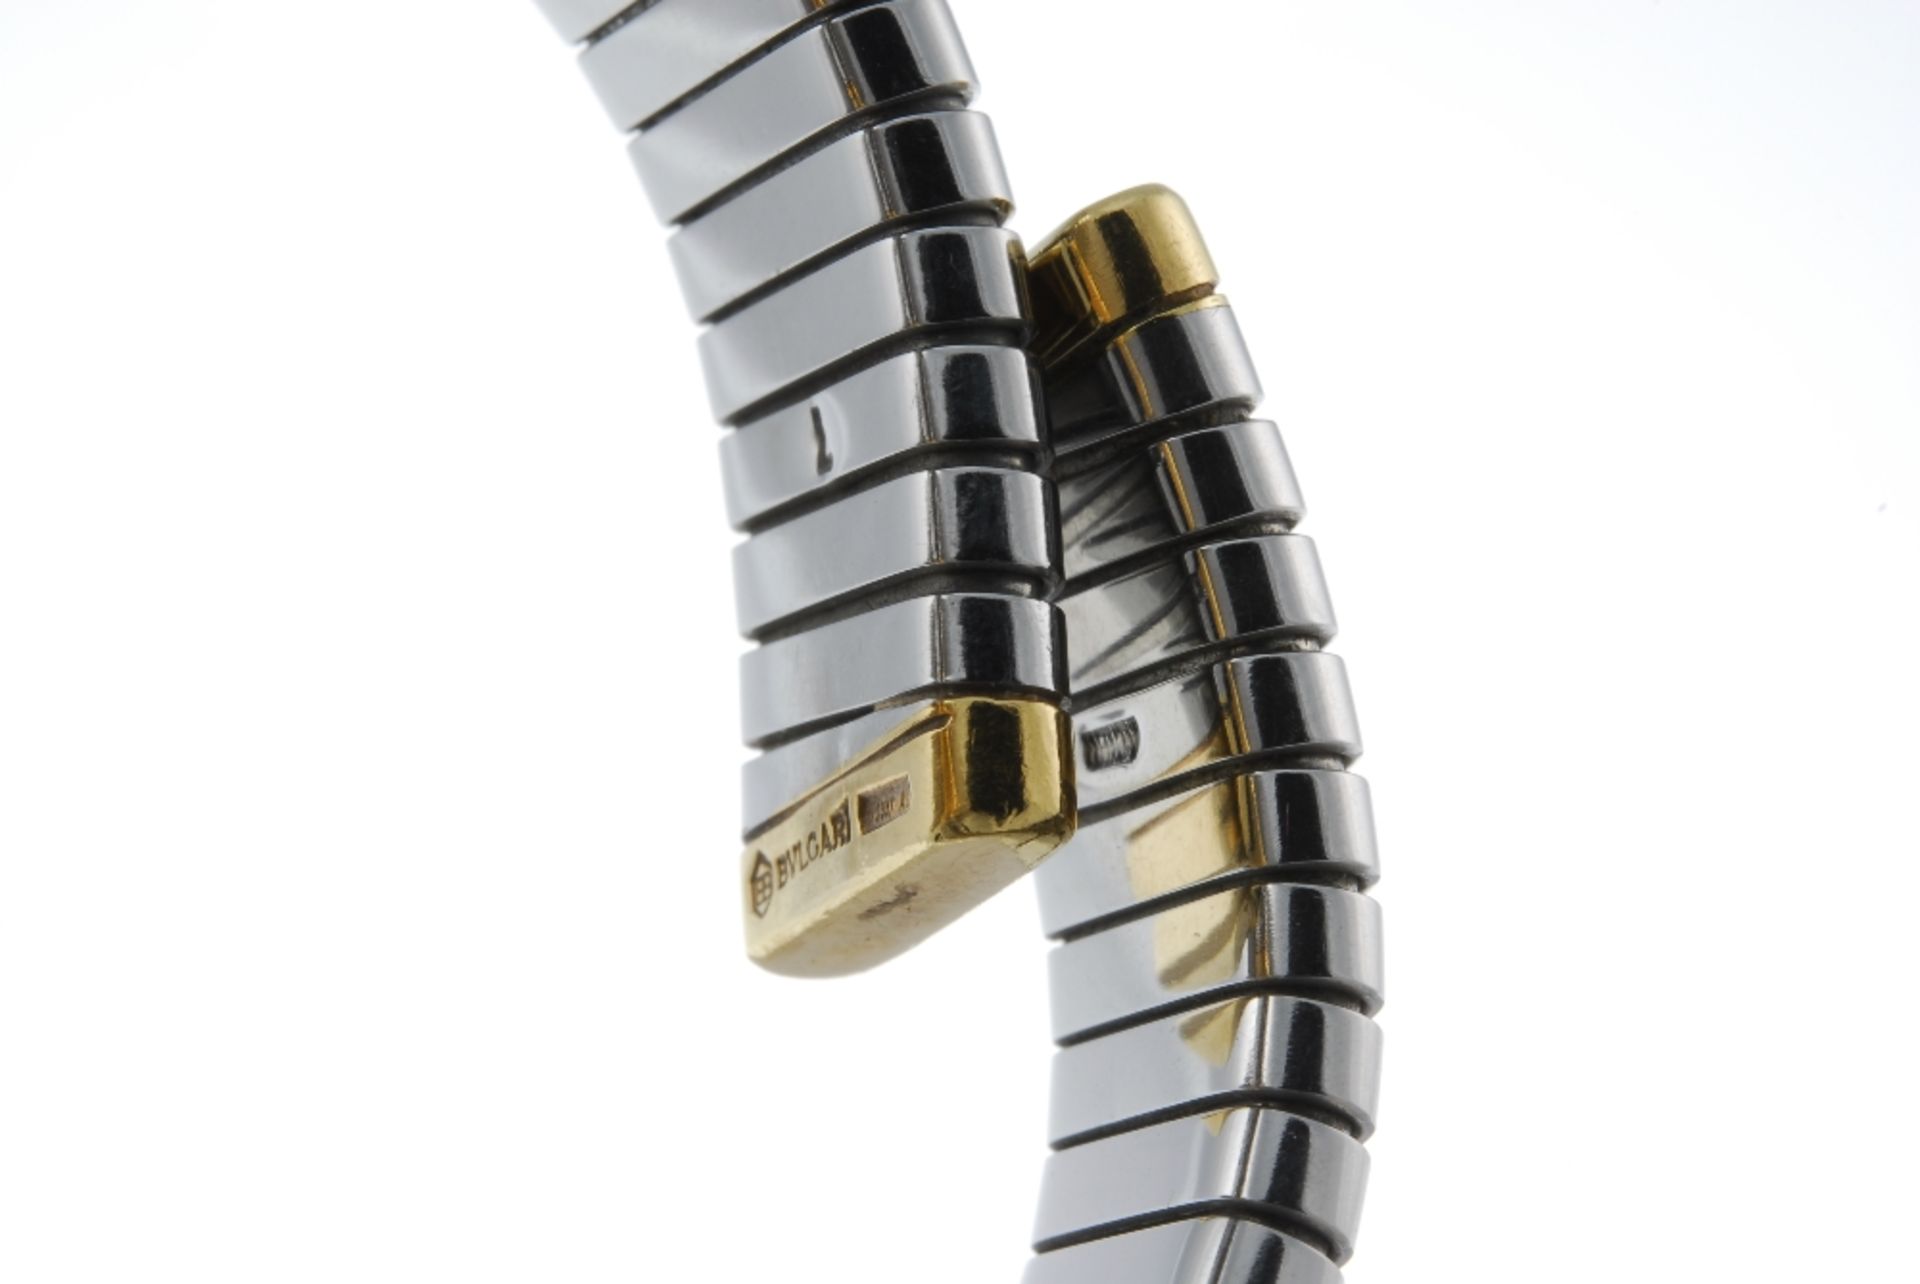 BULGARI - a lady's Tubogas bracelet watch. 18ct yellow gold case. Reference BB 19 2T, serial F21028. - Image 4 of 4